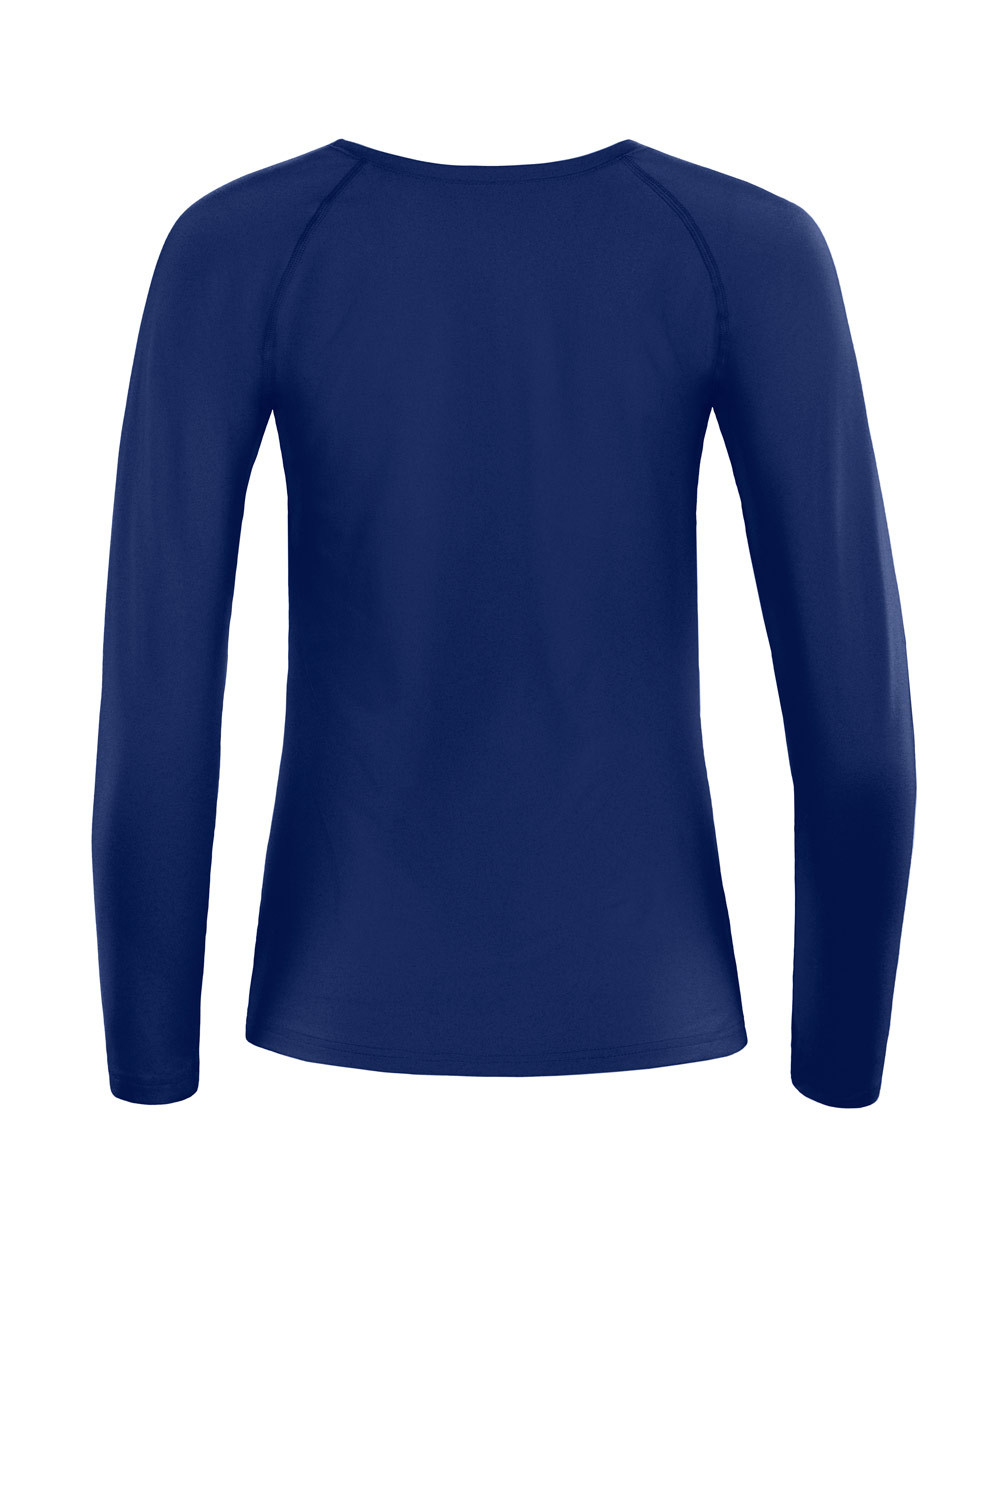 Ultra Sleeve and Long dark Soft AET118LS, Soft Light Style Top blue, Winshape Functional